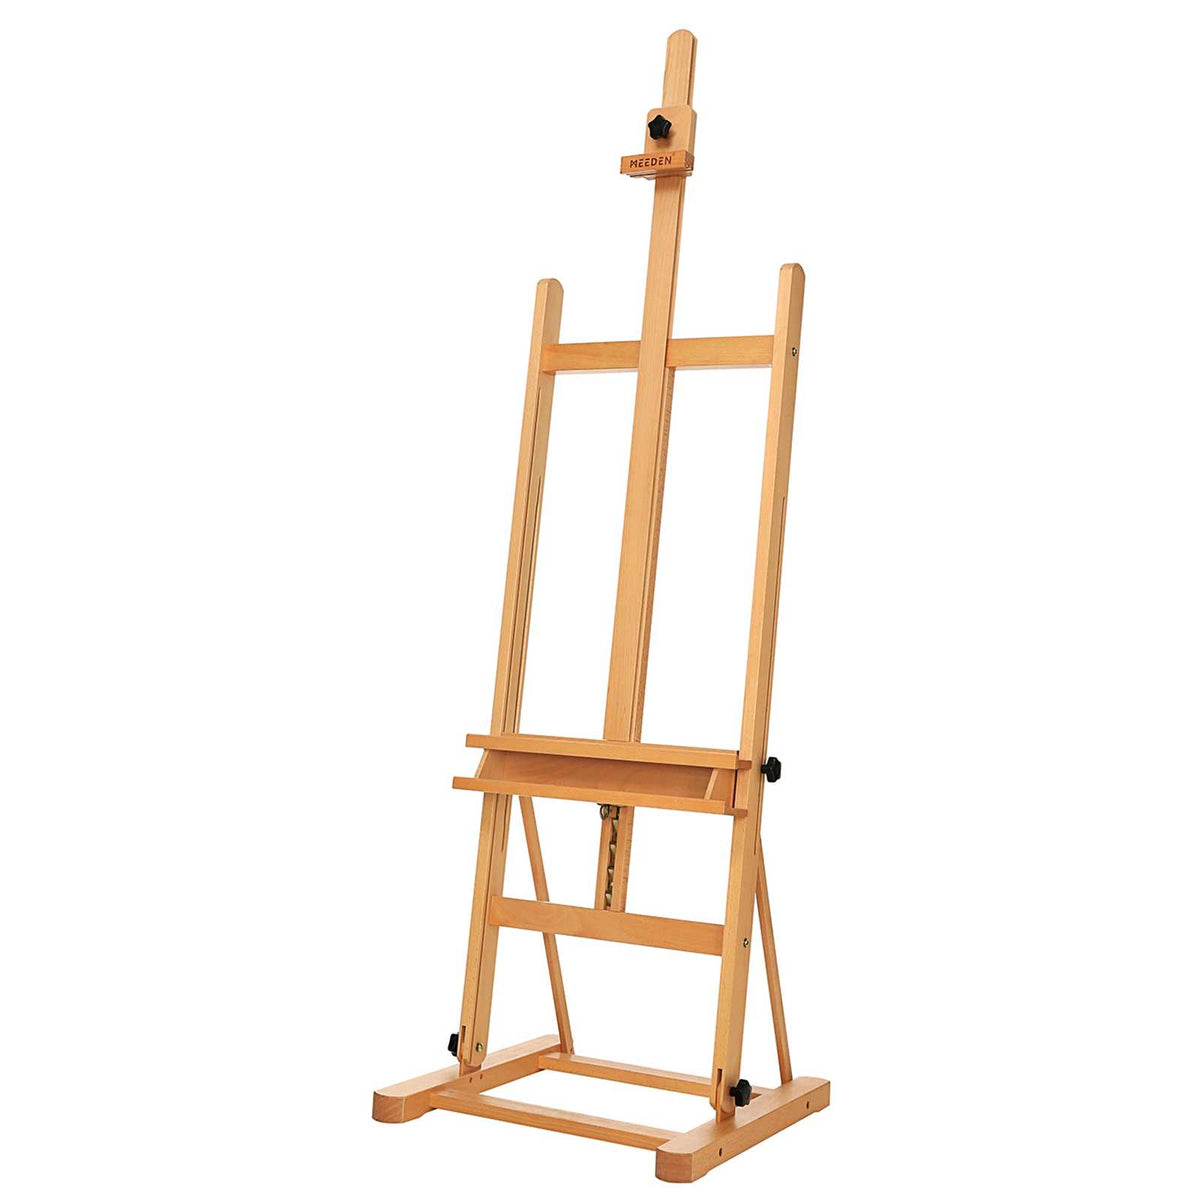 MEEDEN Extra Large H-Frame Easel for Painting, Heavy Duty Studio Art Easel  Stand, Adjustable Wood Easel 75 to 146H, Hold Canvas up to 93,Painting